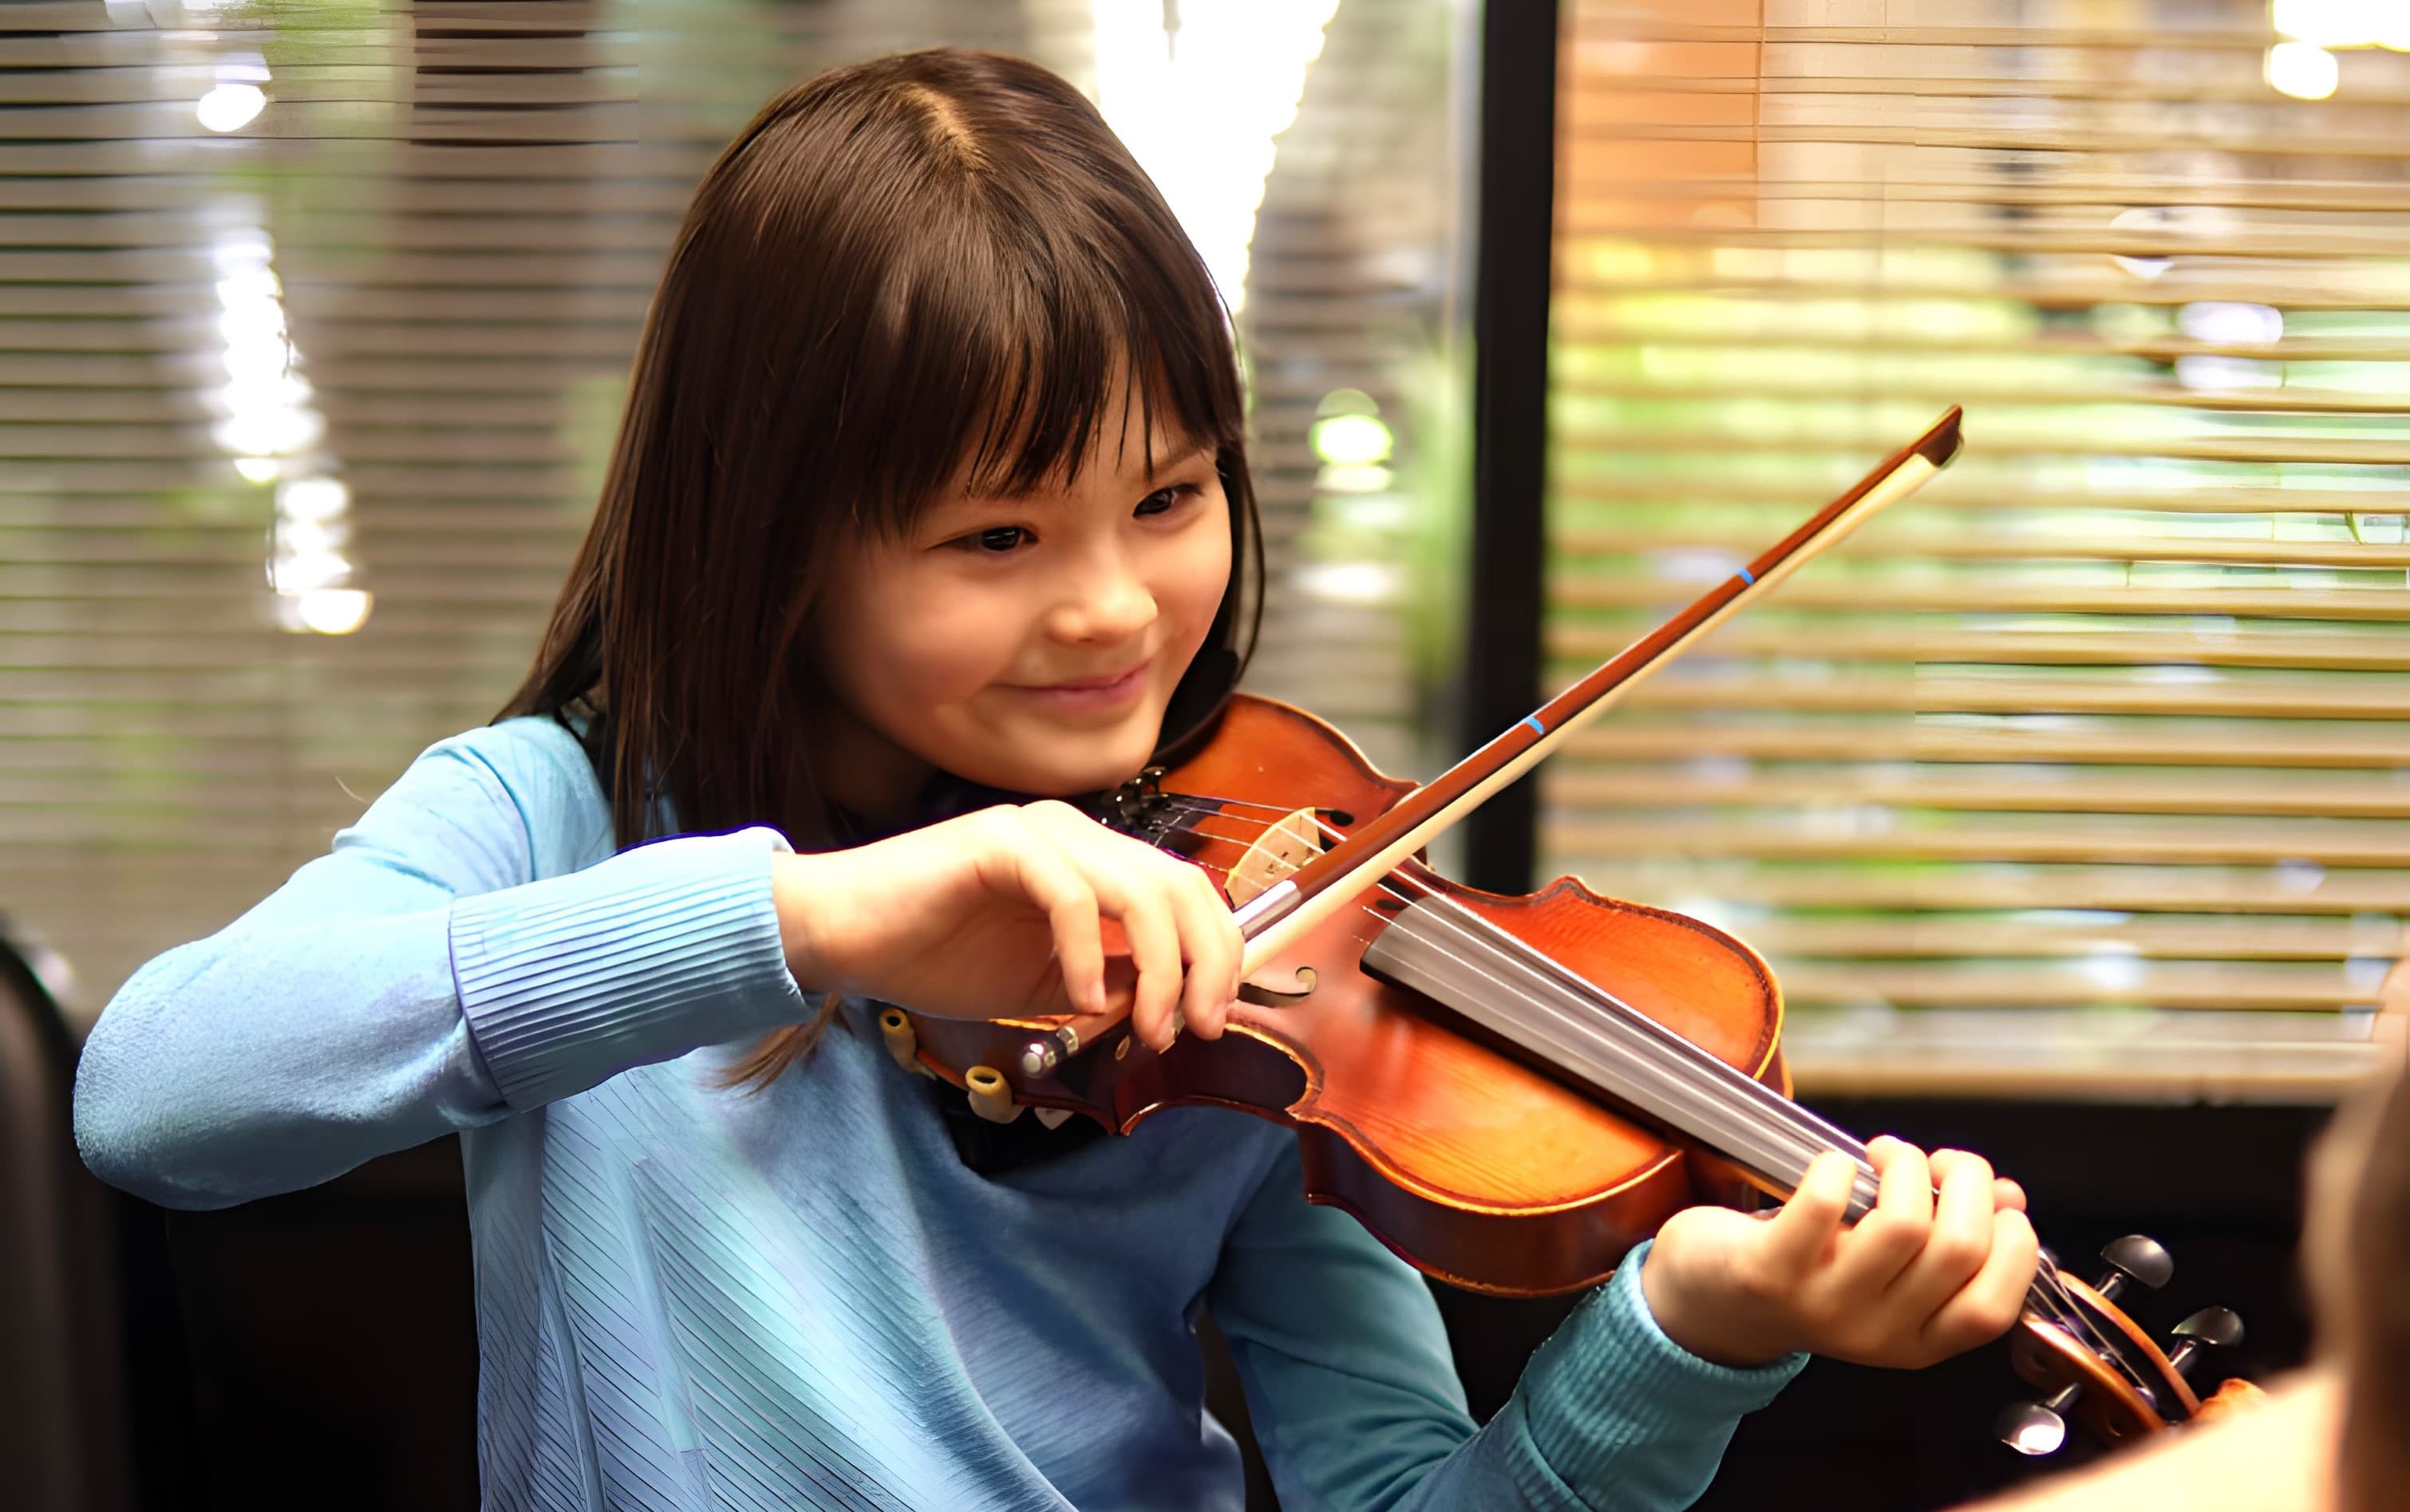 Violin lessons make this girl happy!